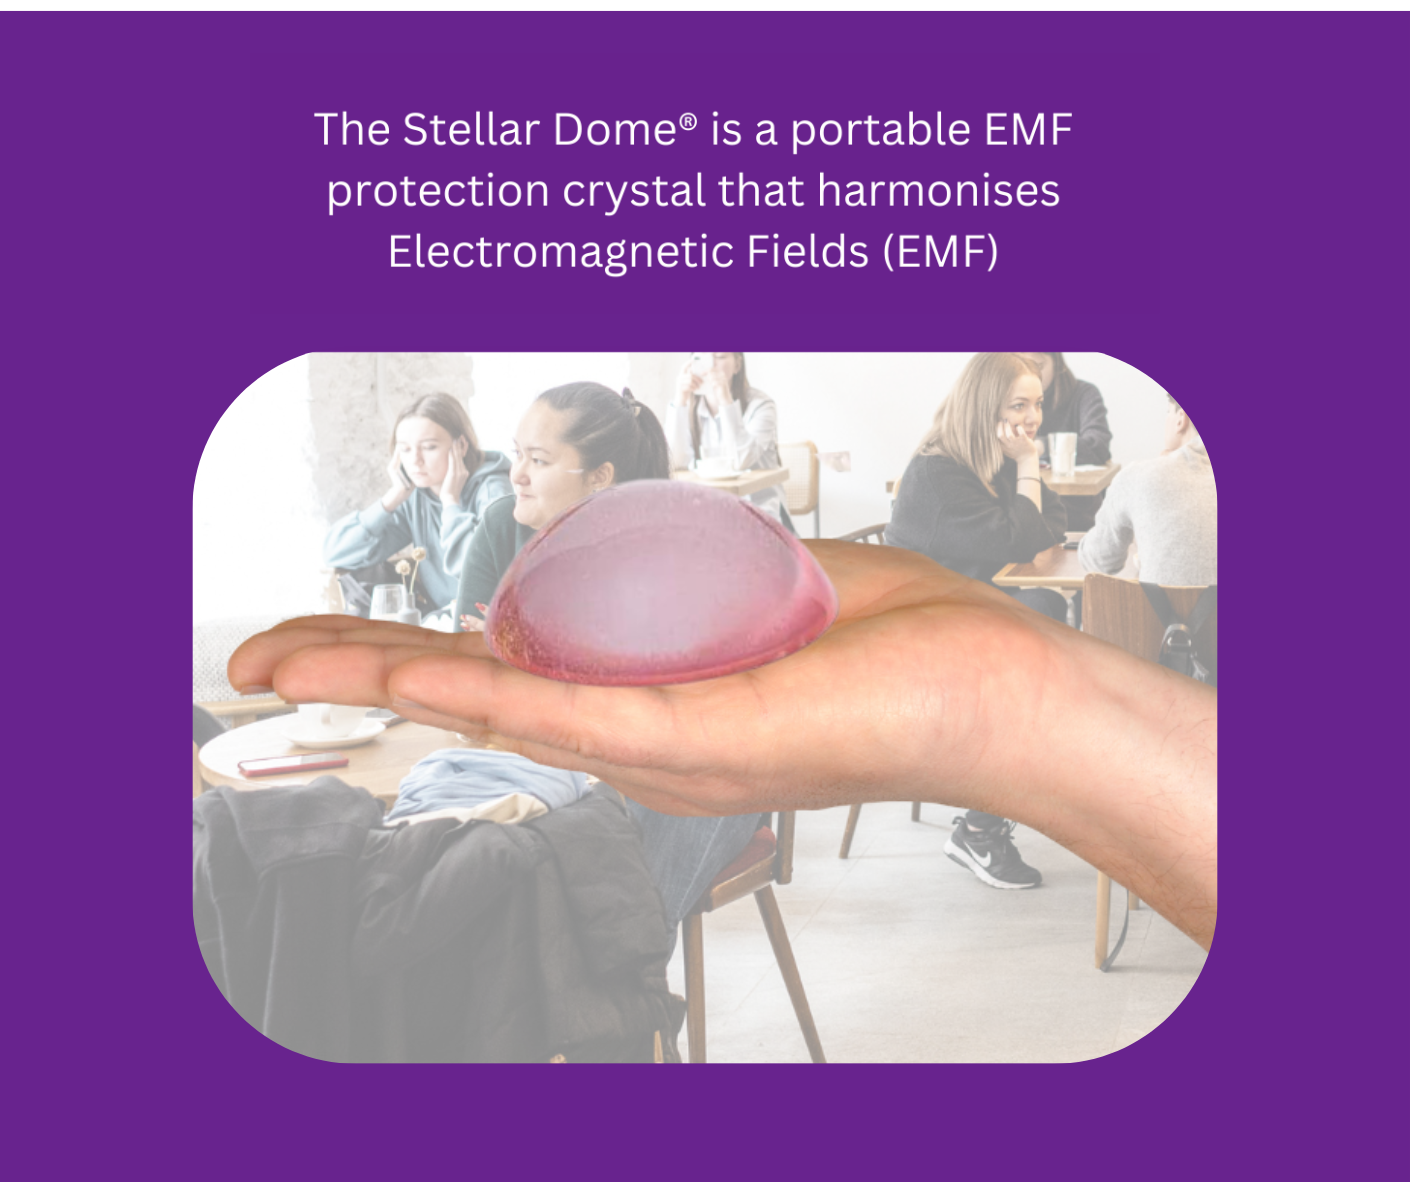 The Stellar Dome is a portable EMF protection crystal that harmonises electromagnetic fields(EMF)